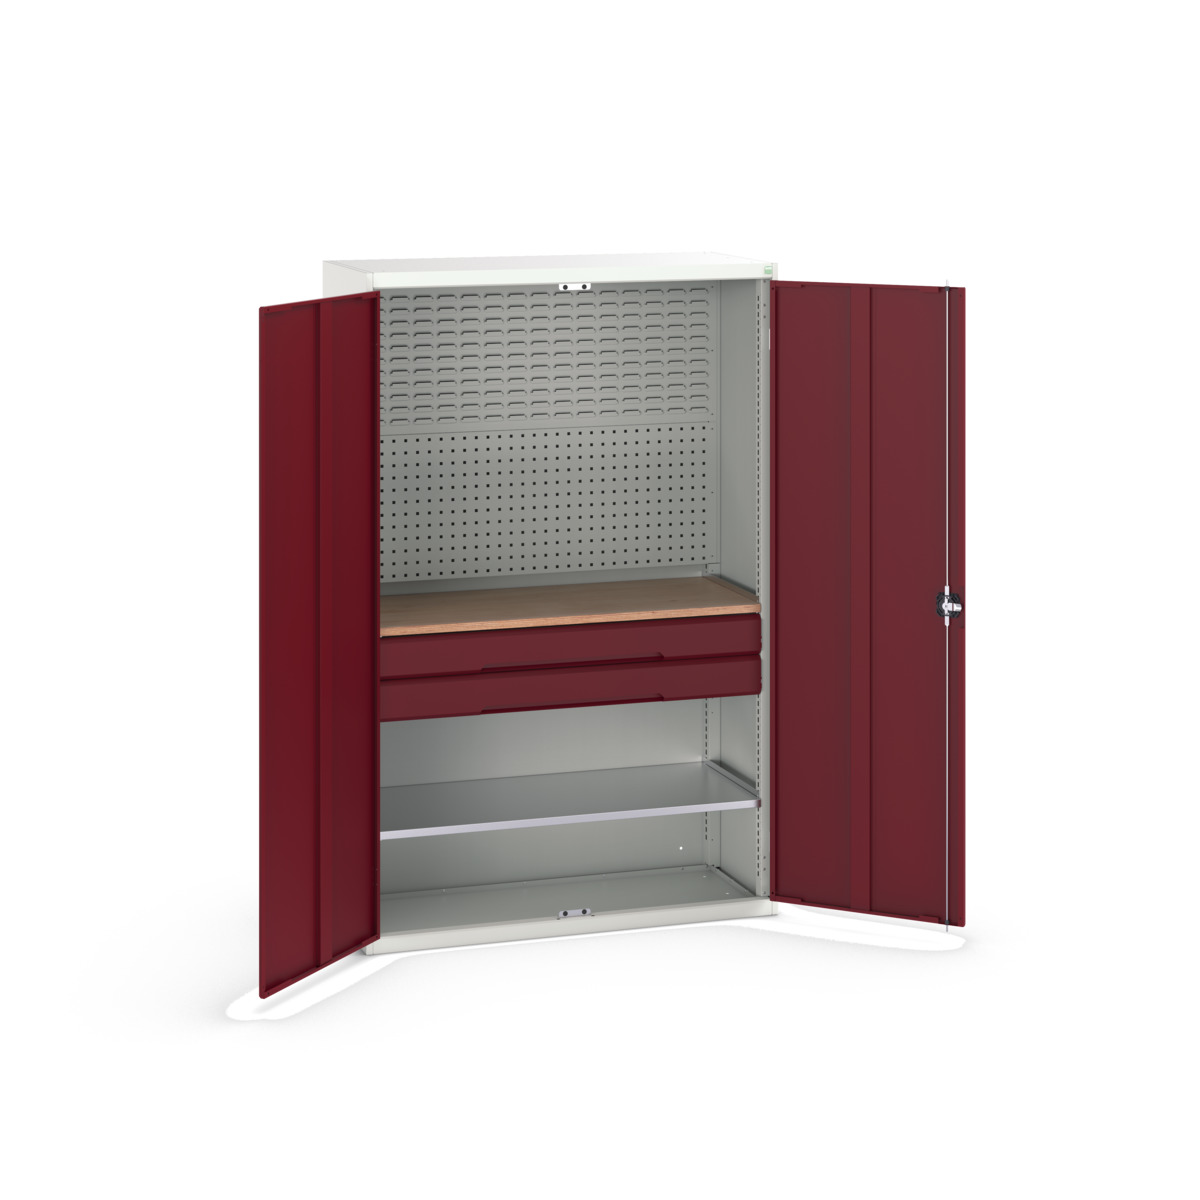 16926593.24 - verso kitted cupboard